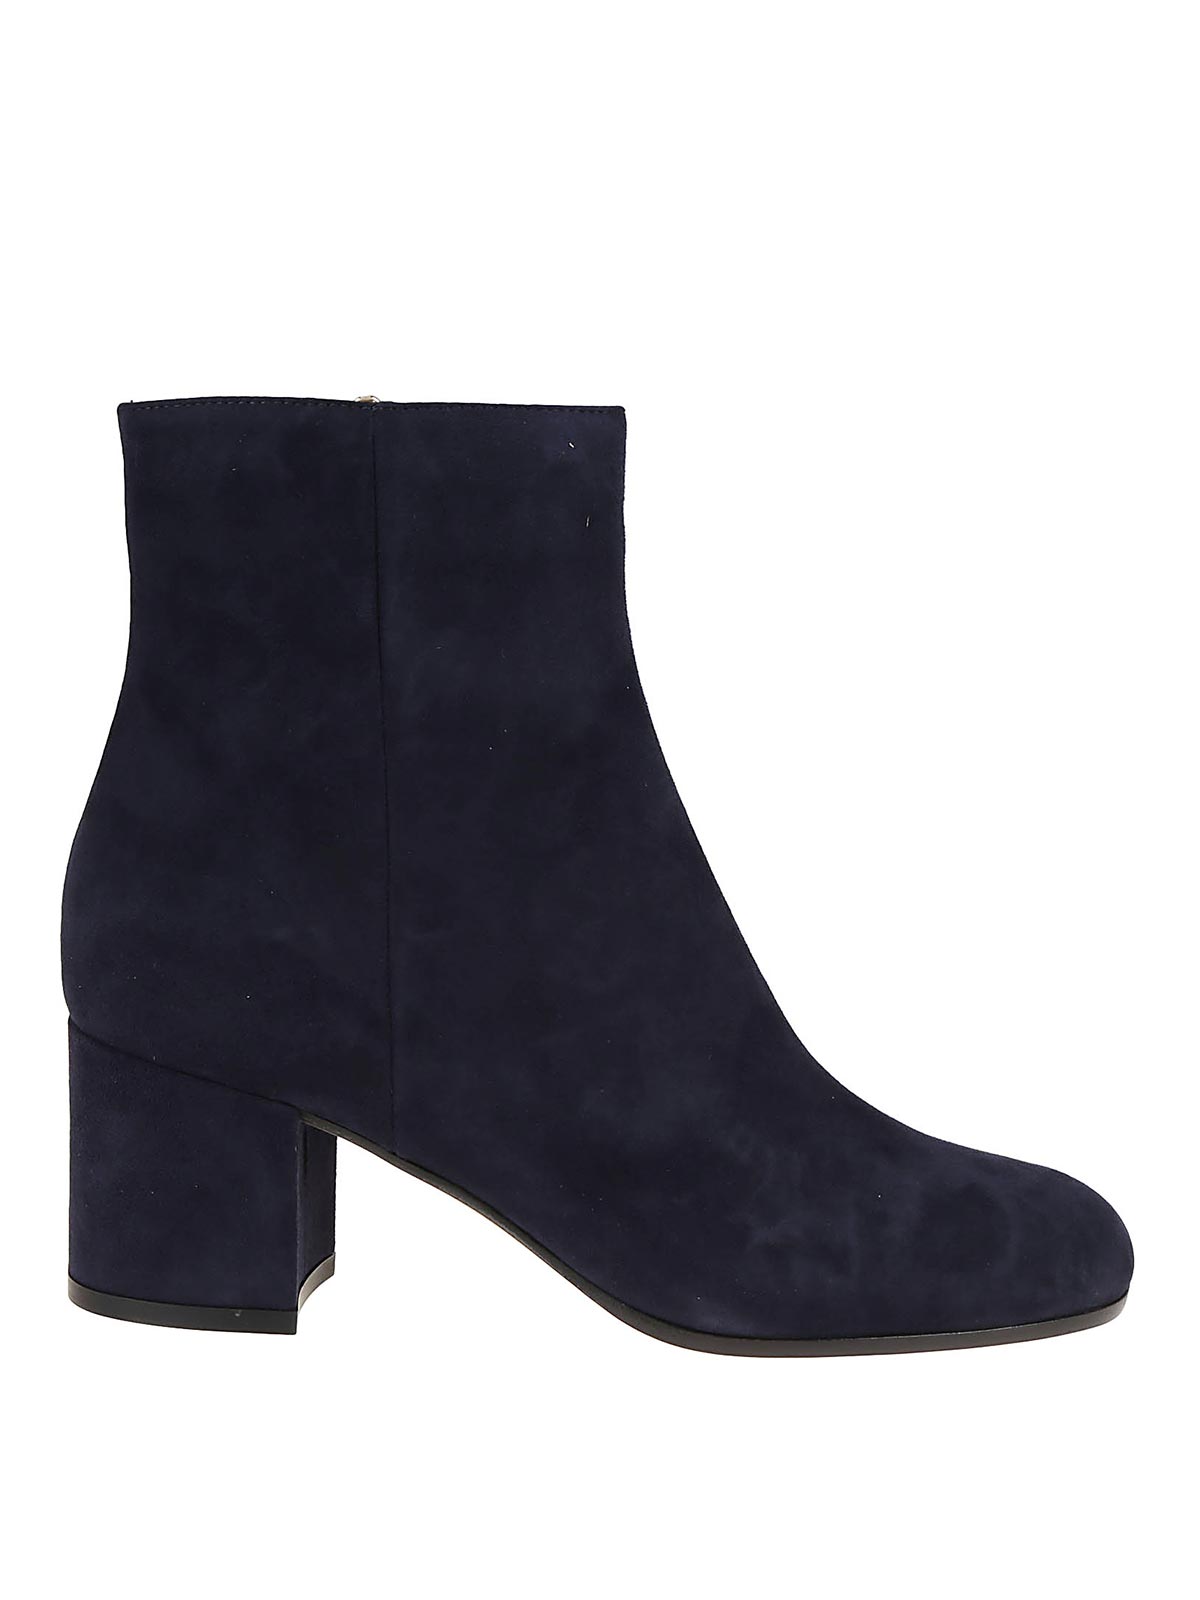 margaux mid bootie gianvito rossi - ブーティ